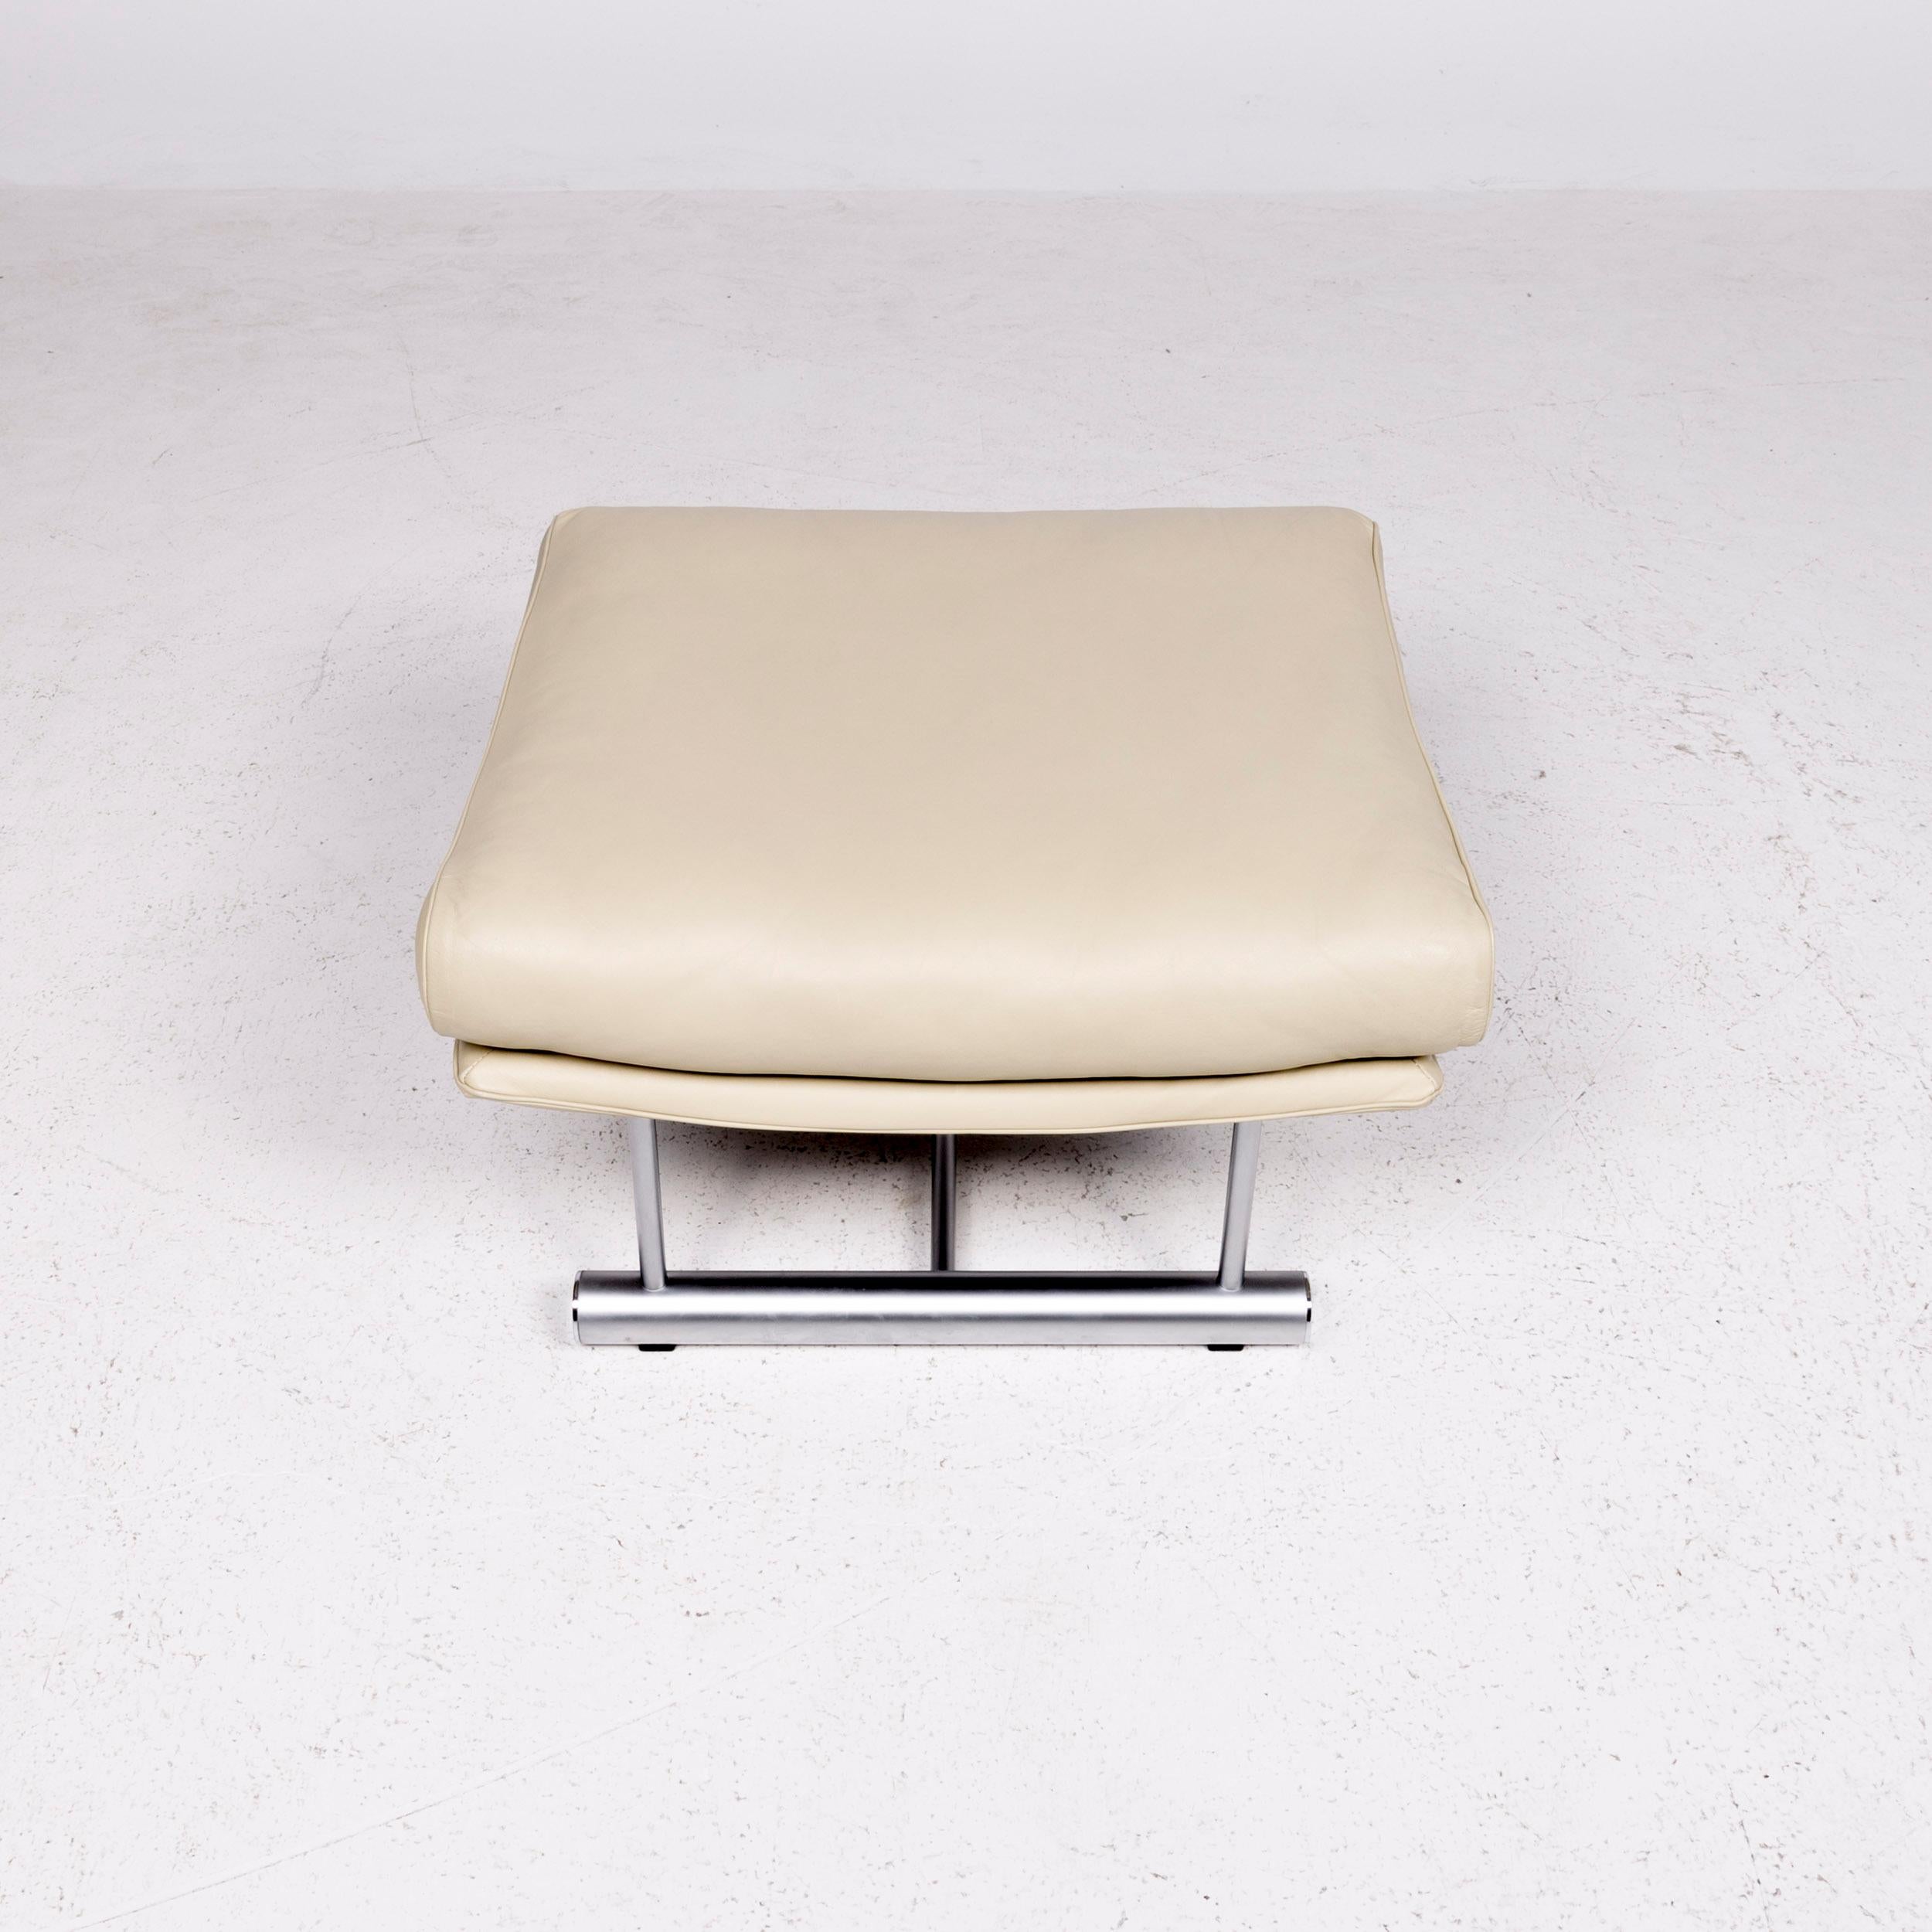 Contemporary Rolf Benz Designer Leather Stool Beige Genuine Leather Stool